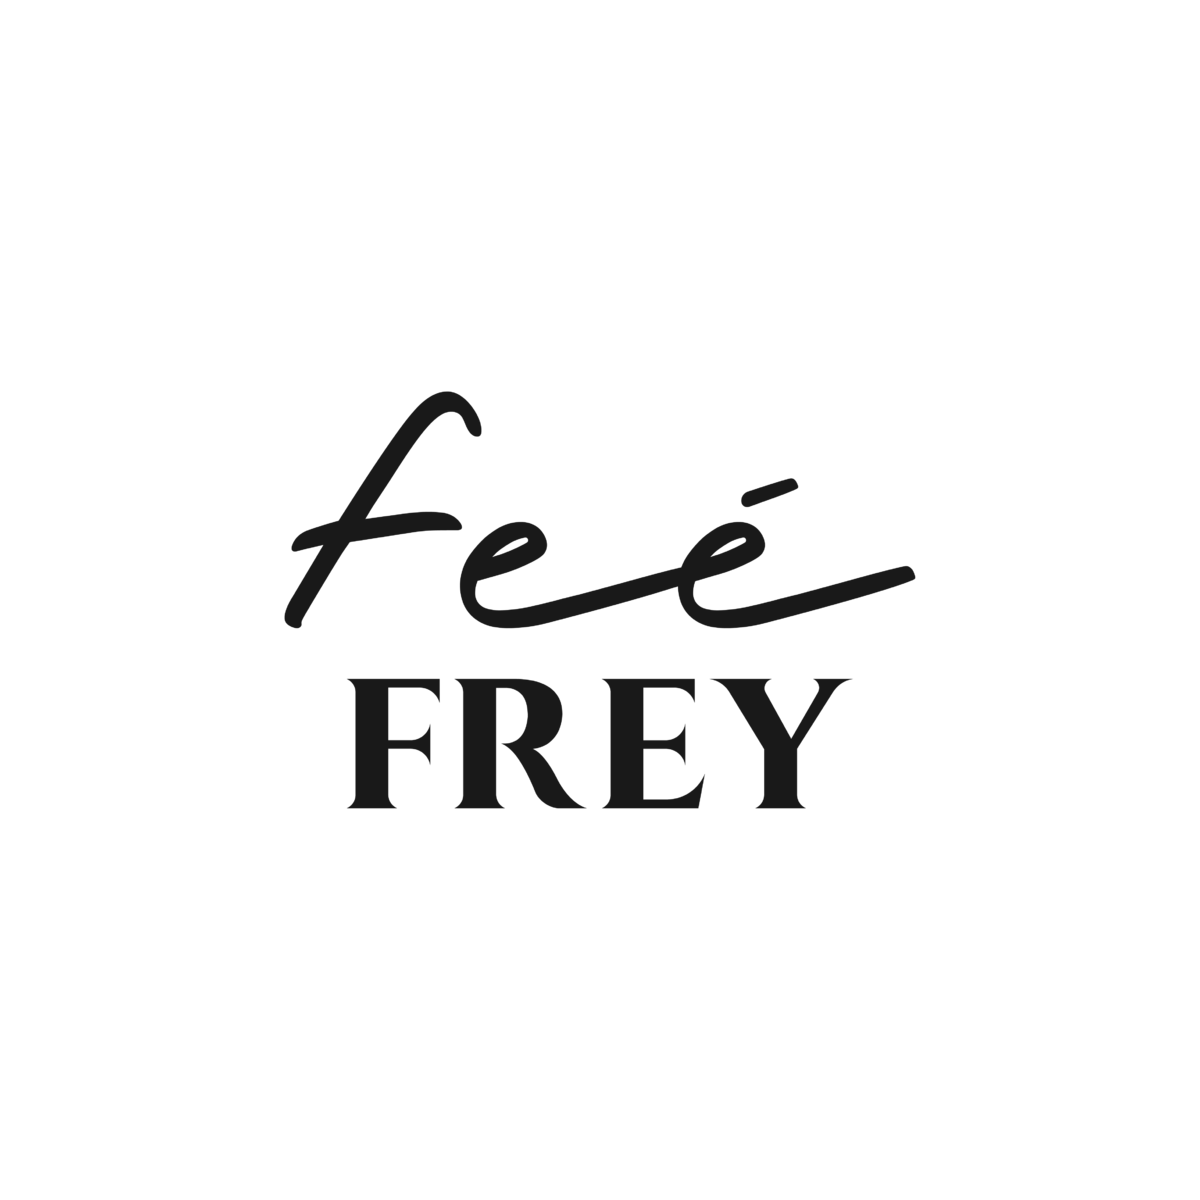 Fee Frey — The center of attention